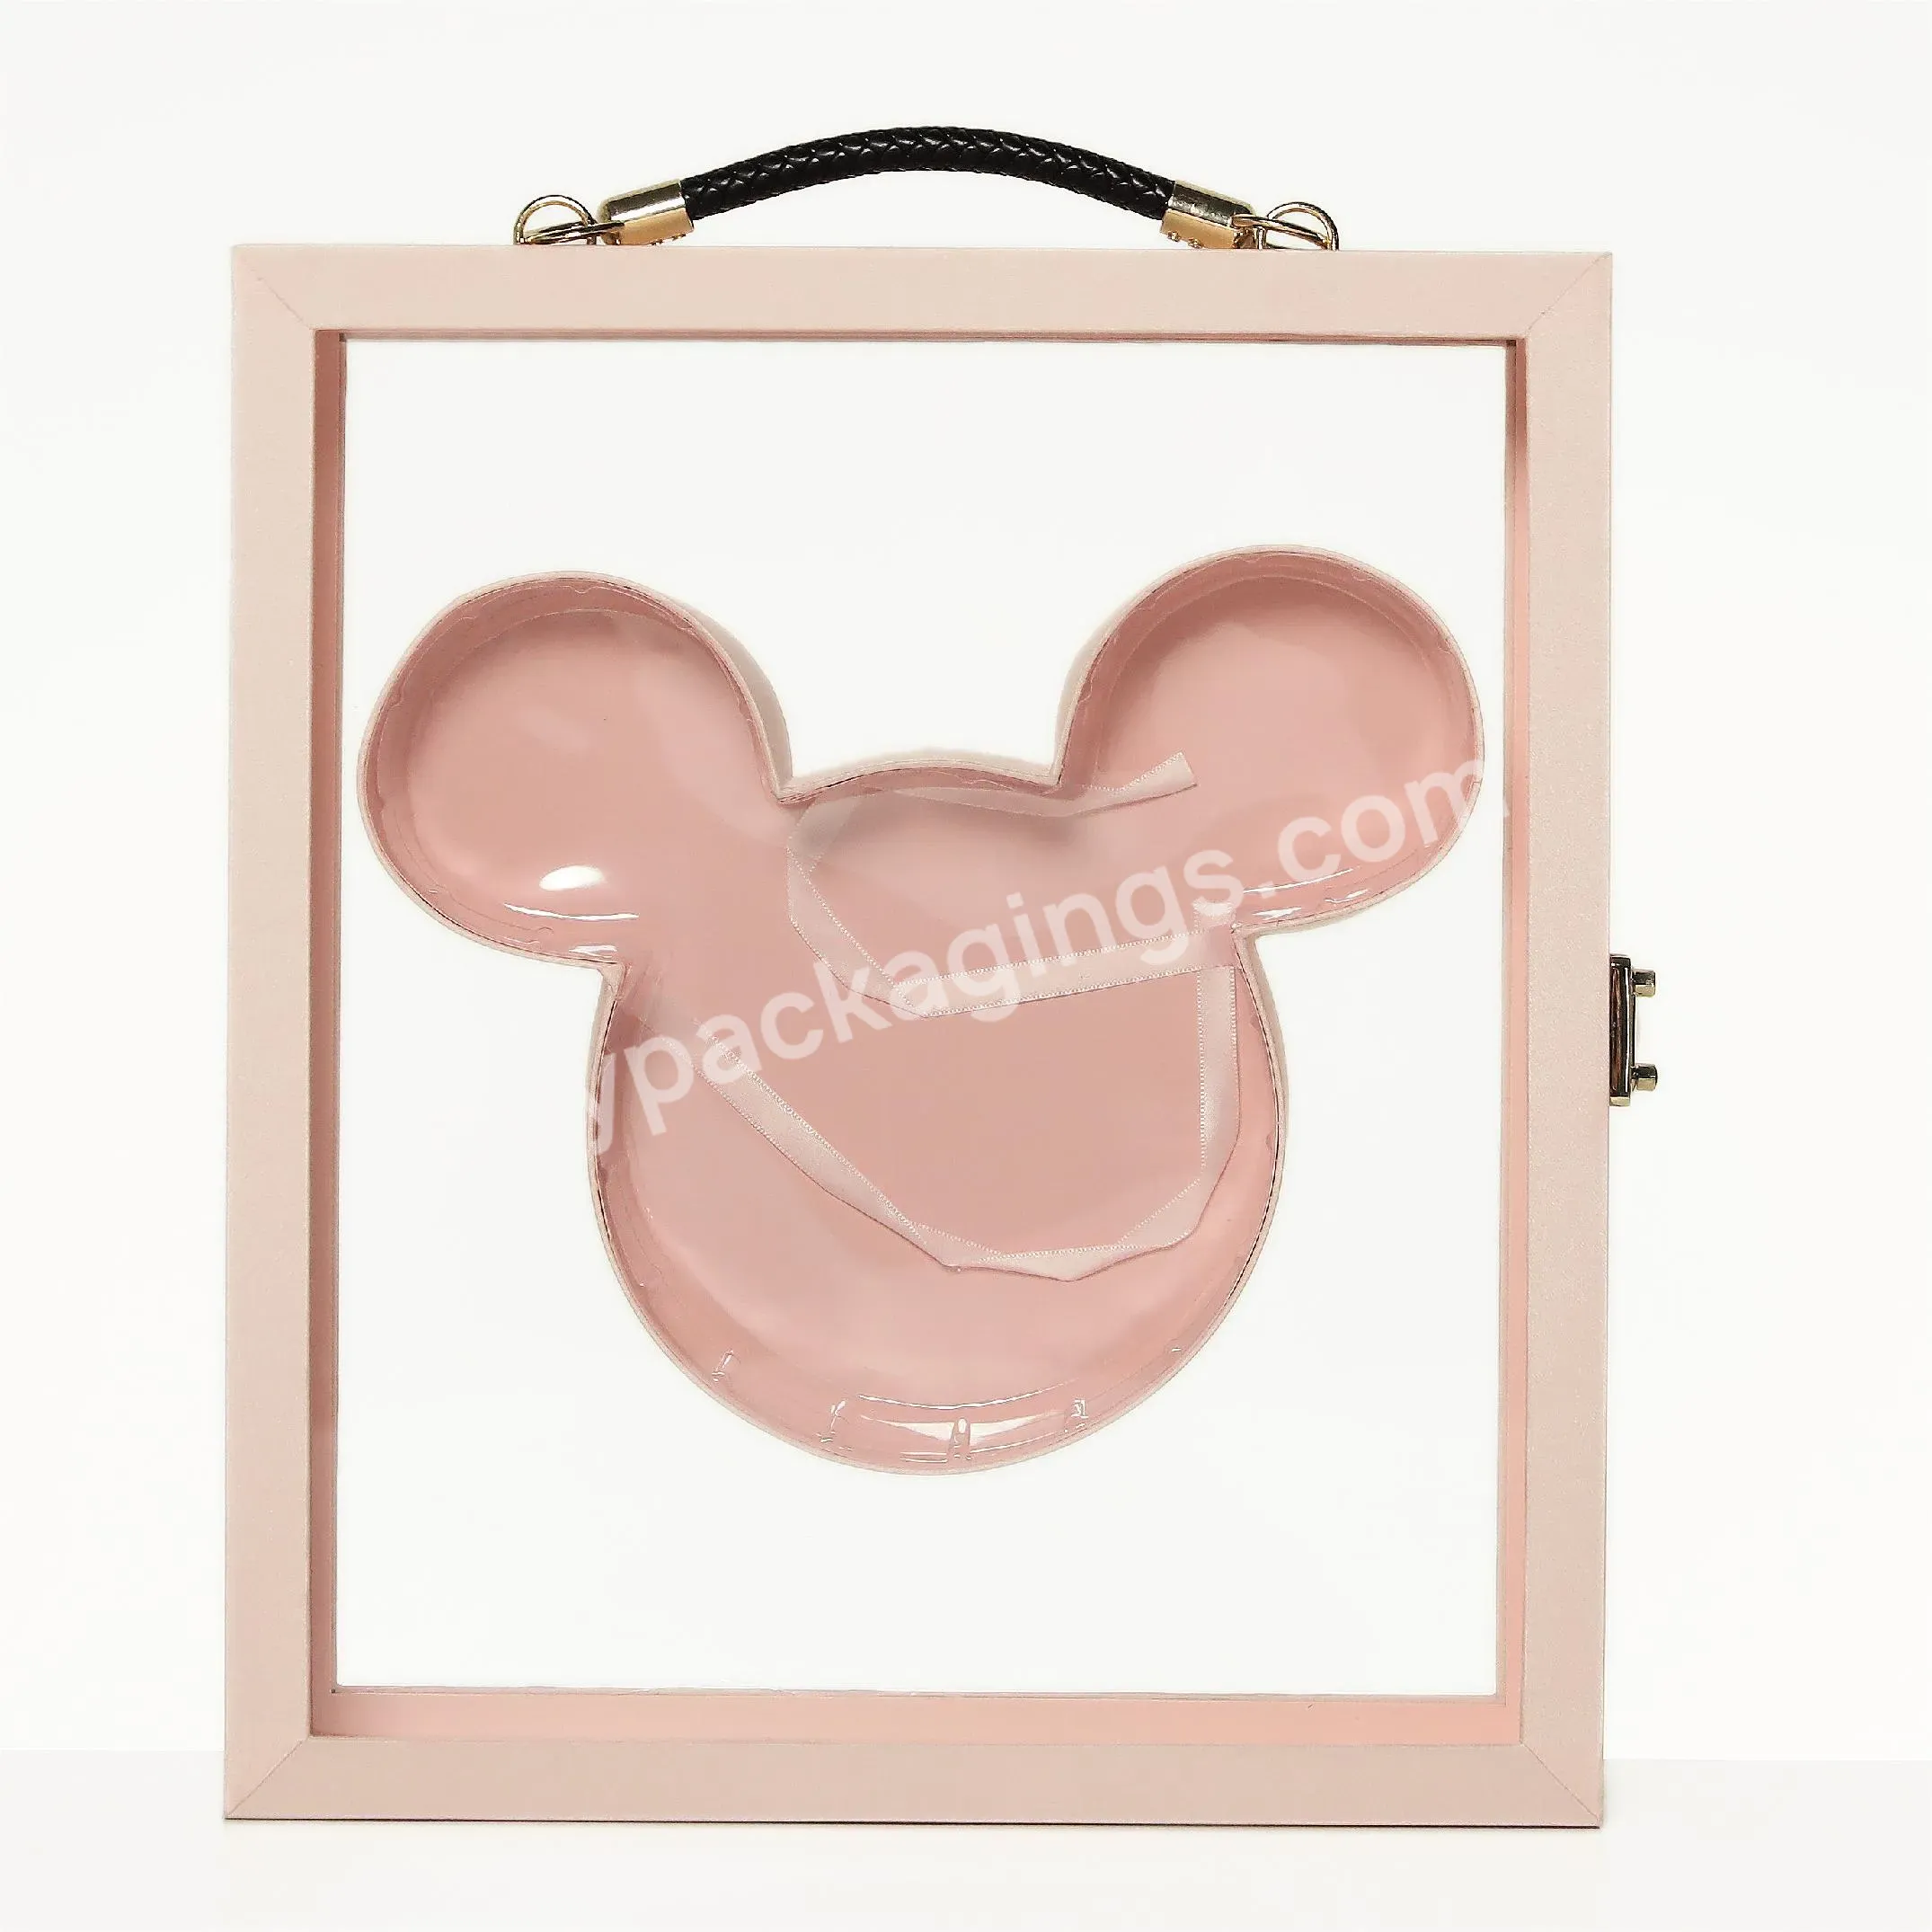 Wholesale Luxury Leather Square Flower Boxes Floral Box With Mickey Shape Inner For Valentine's Day Wedding - Buy Wholesale Luxury Leather Square Flower Boxes,Floral Box With Mickey Shape Inner,Floral Box For Valentine's Day Wedding.